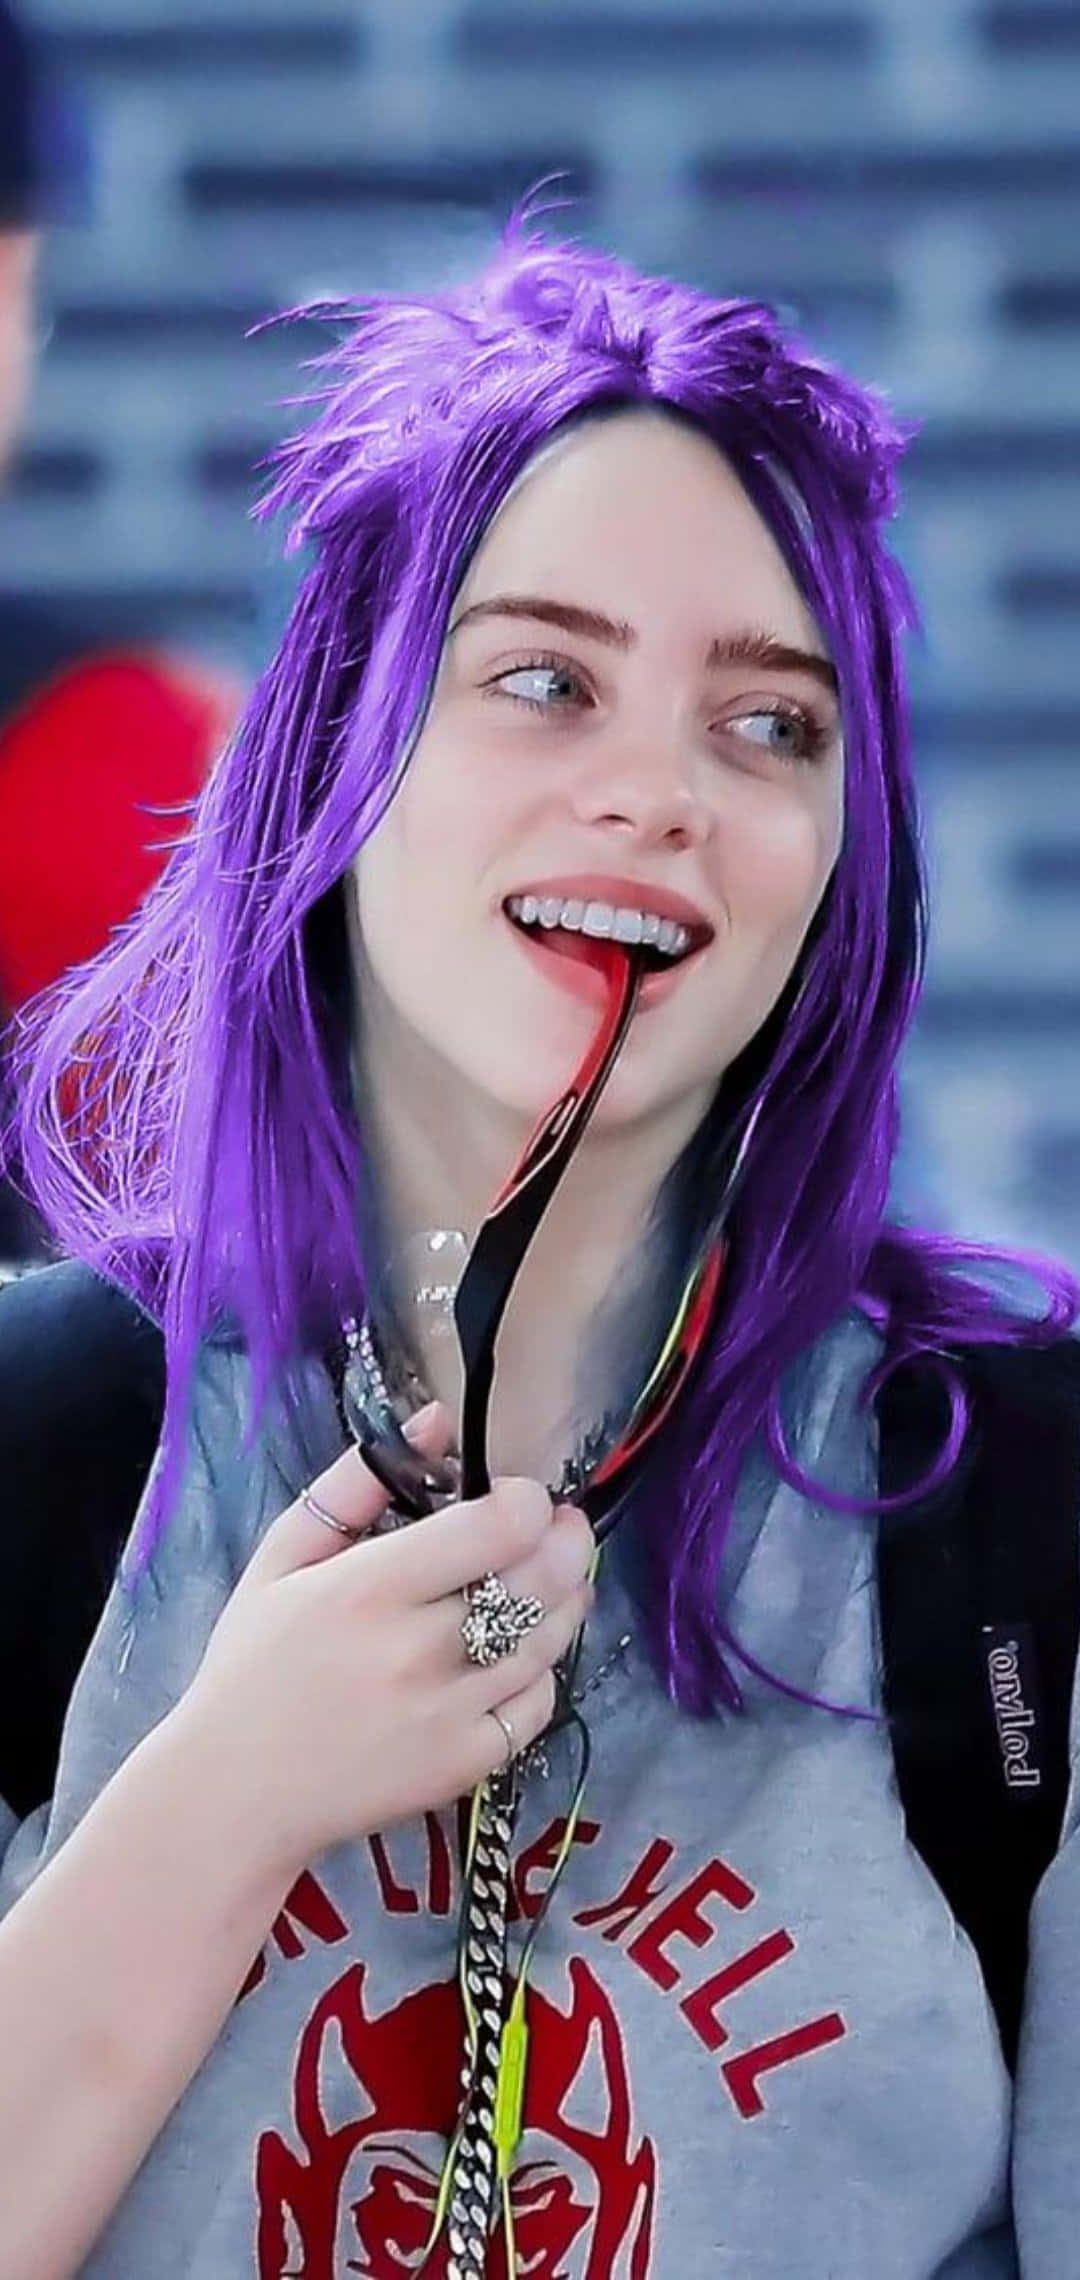 Billie Eilish gracing the stage with her signature style and powerhouse vocals